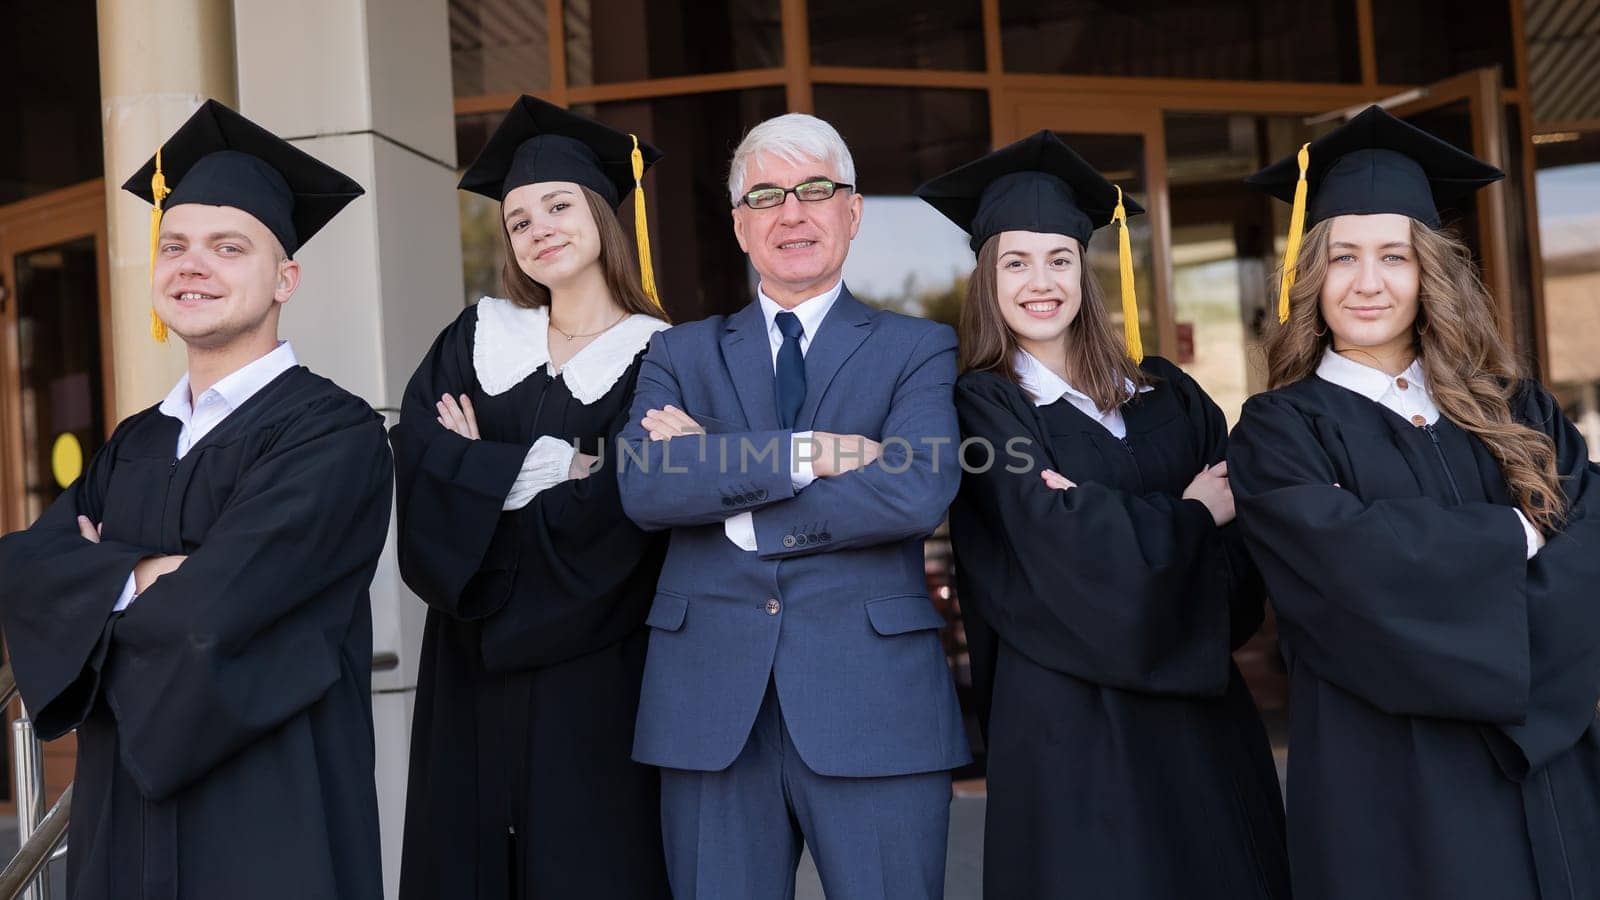 A gray-haired male teacher congratulates students on their graduation from the university